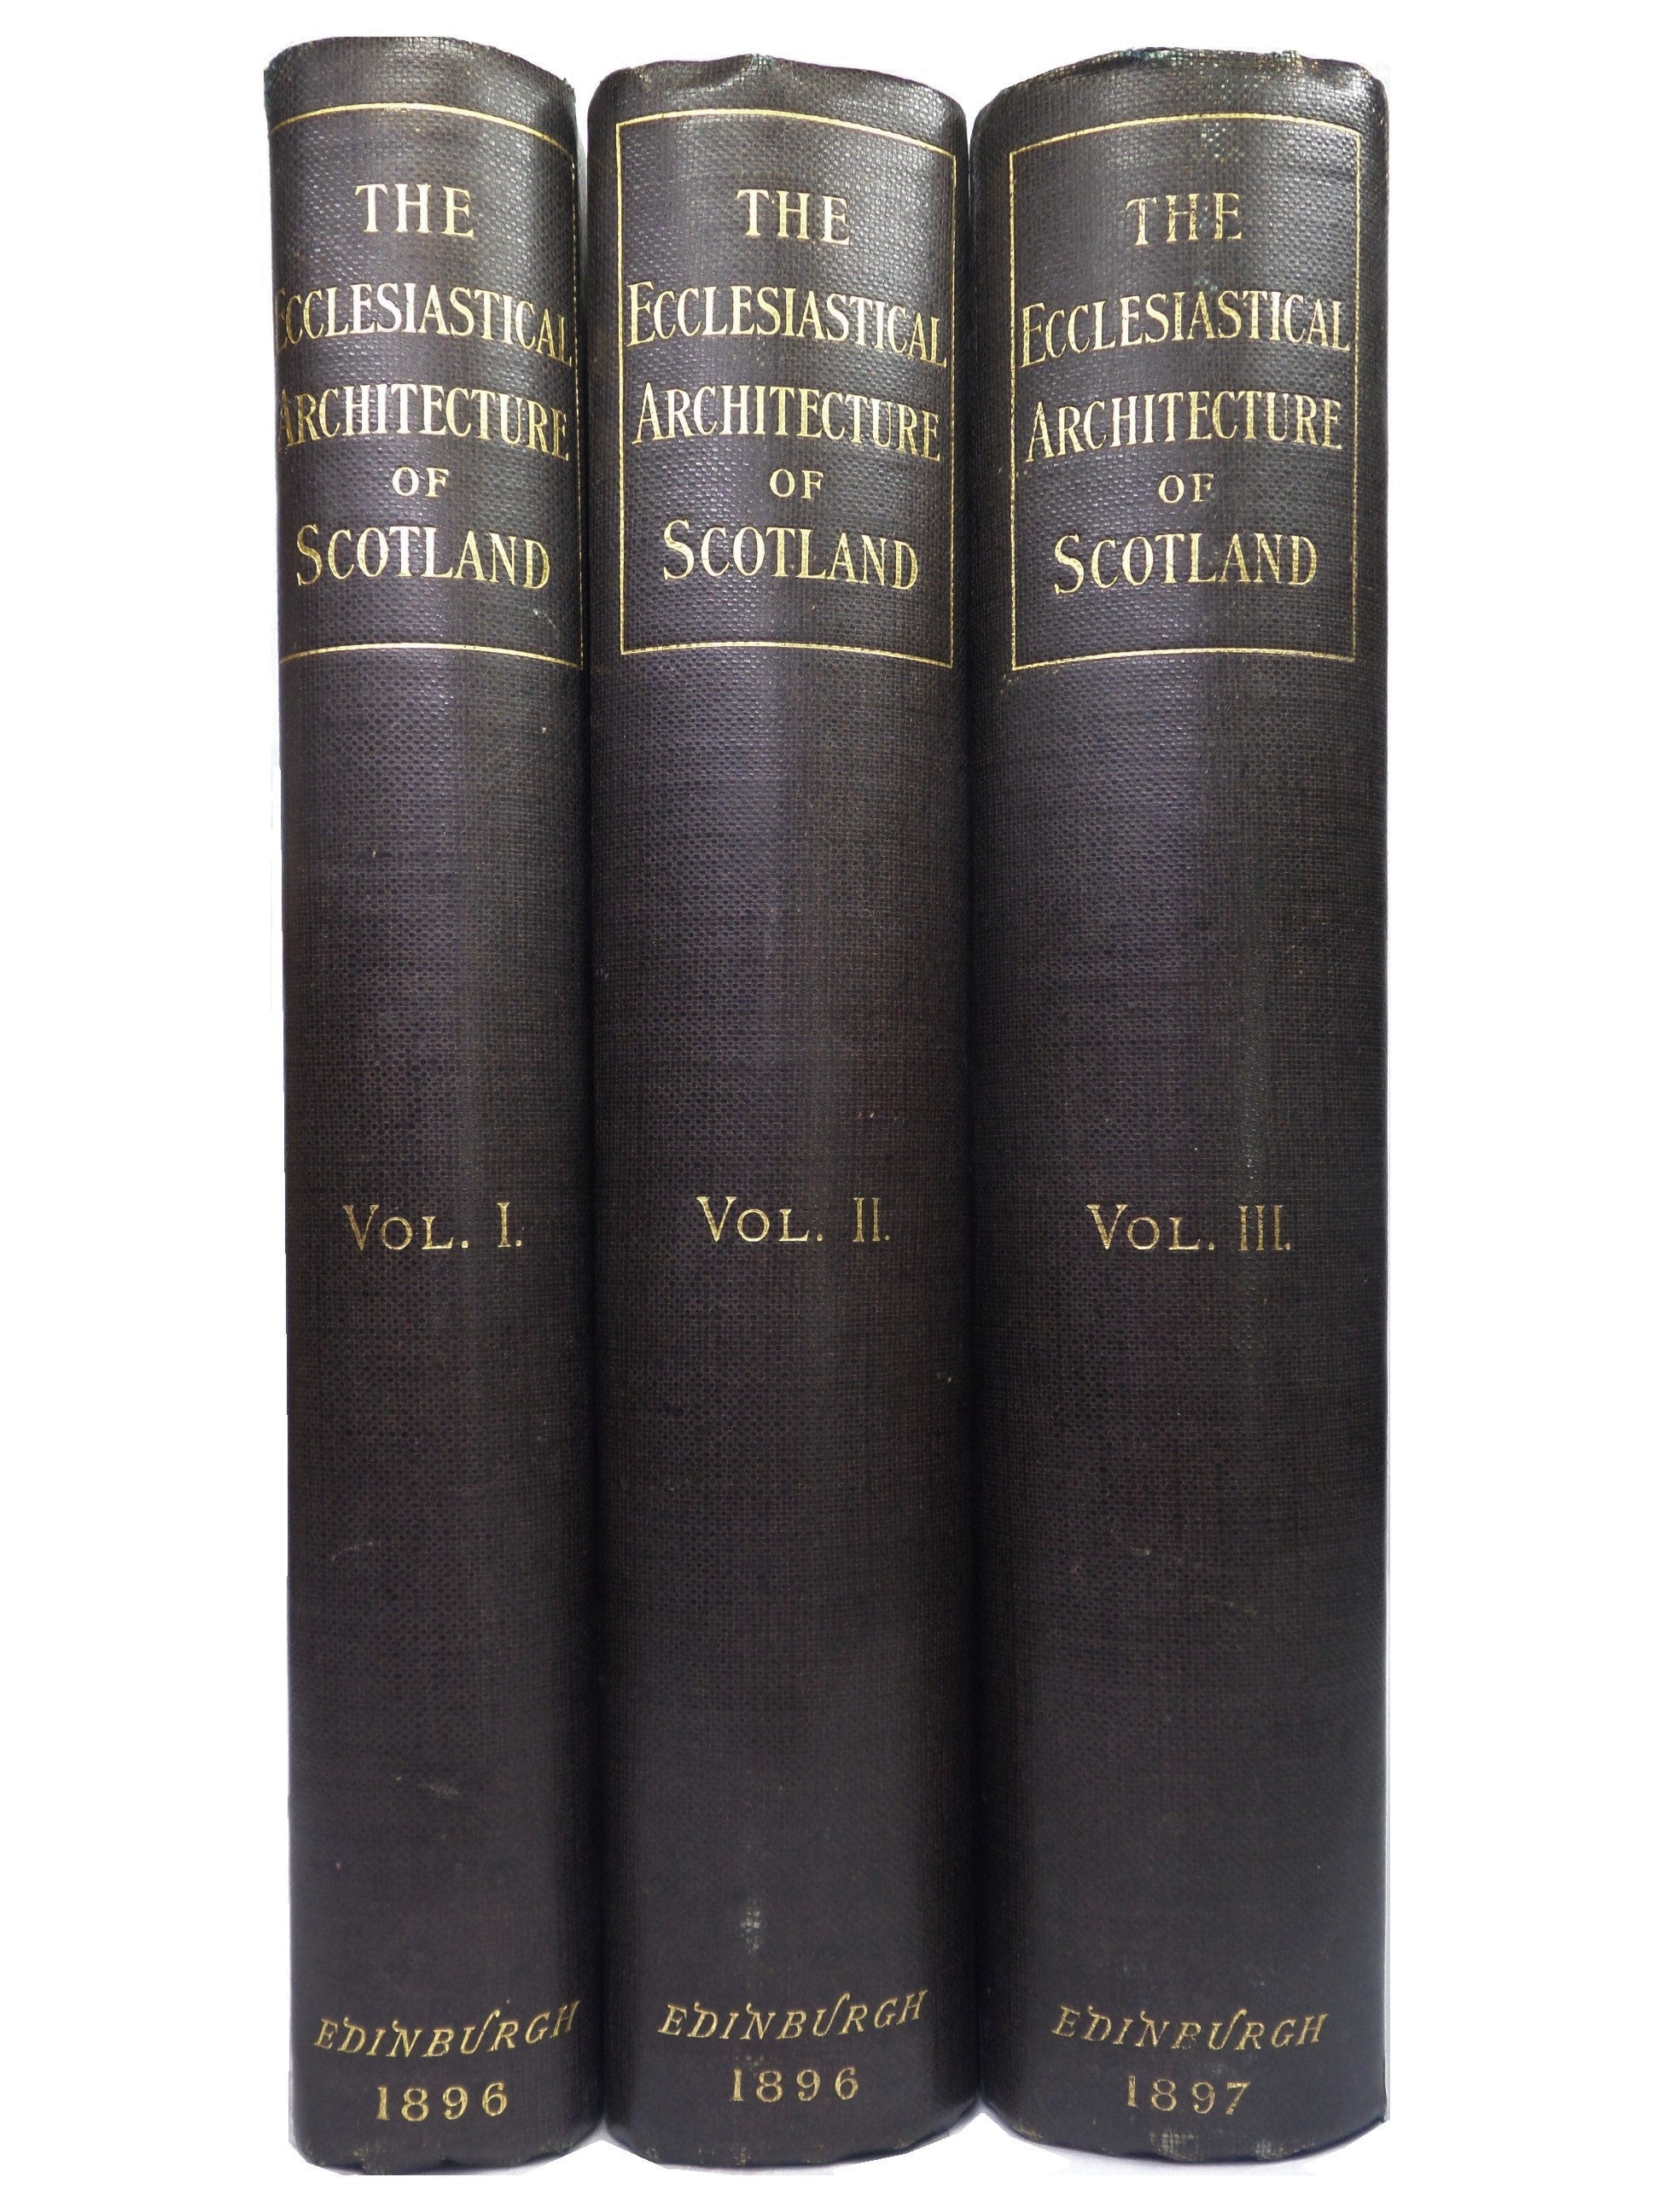 THE ECCLESIASTICAL ARCHITECTURE OF SCOTLAND BY MACGIBBON & ROSS 1896-1897 FIRST EDITION